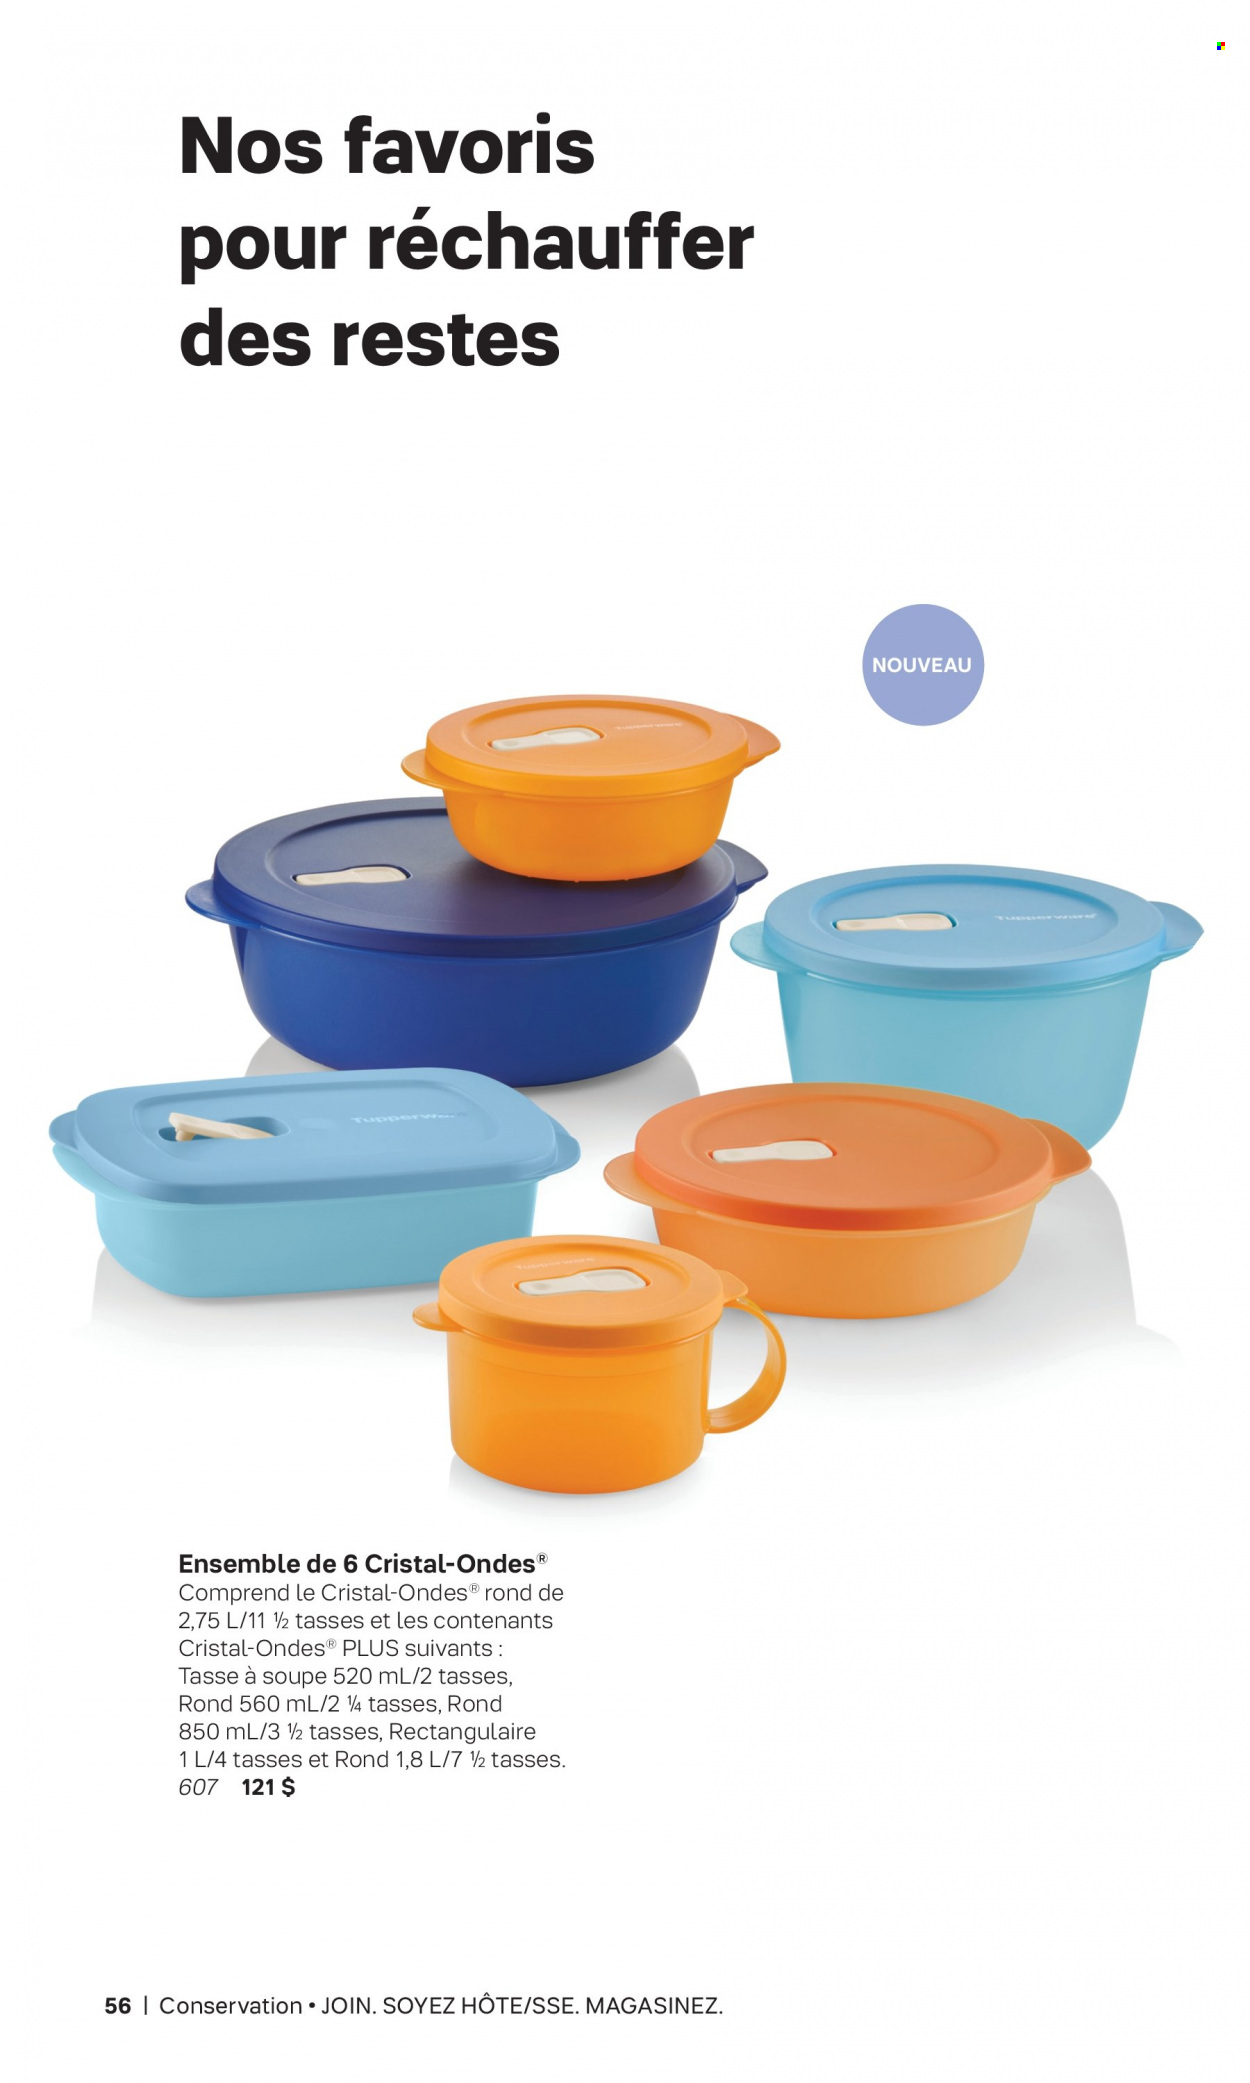 Tupperware flyer . Page 56.